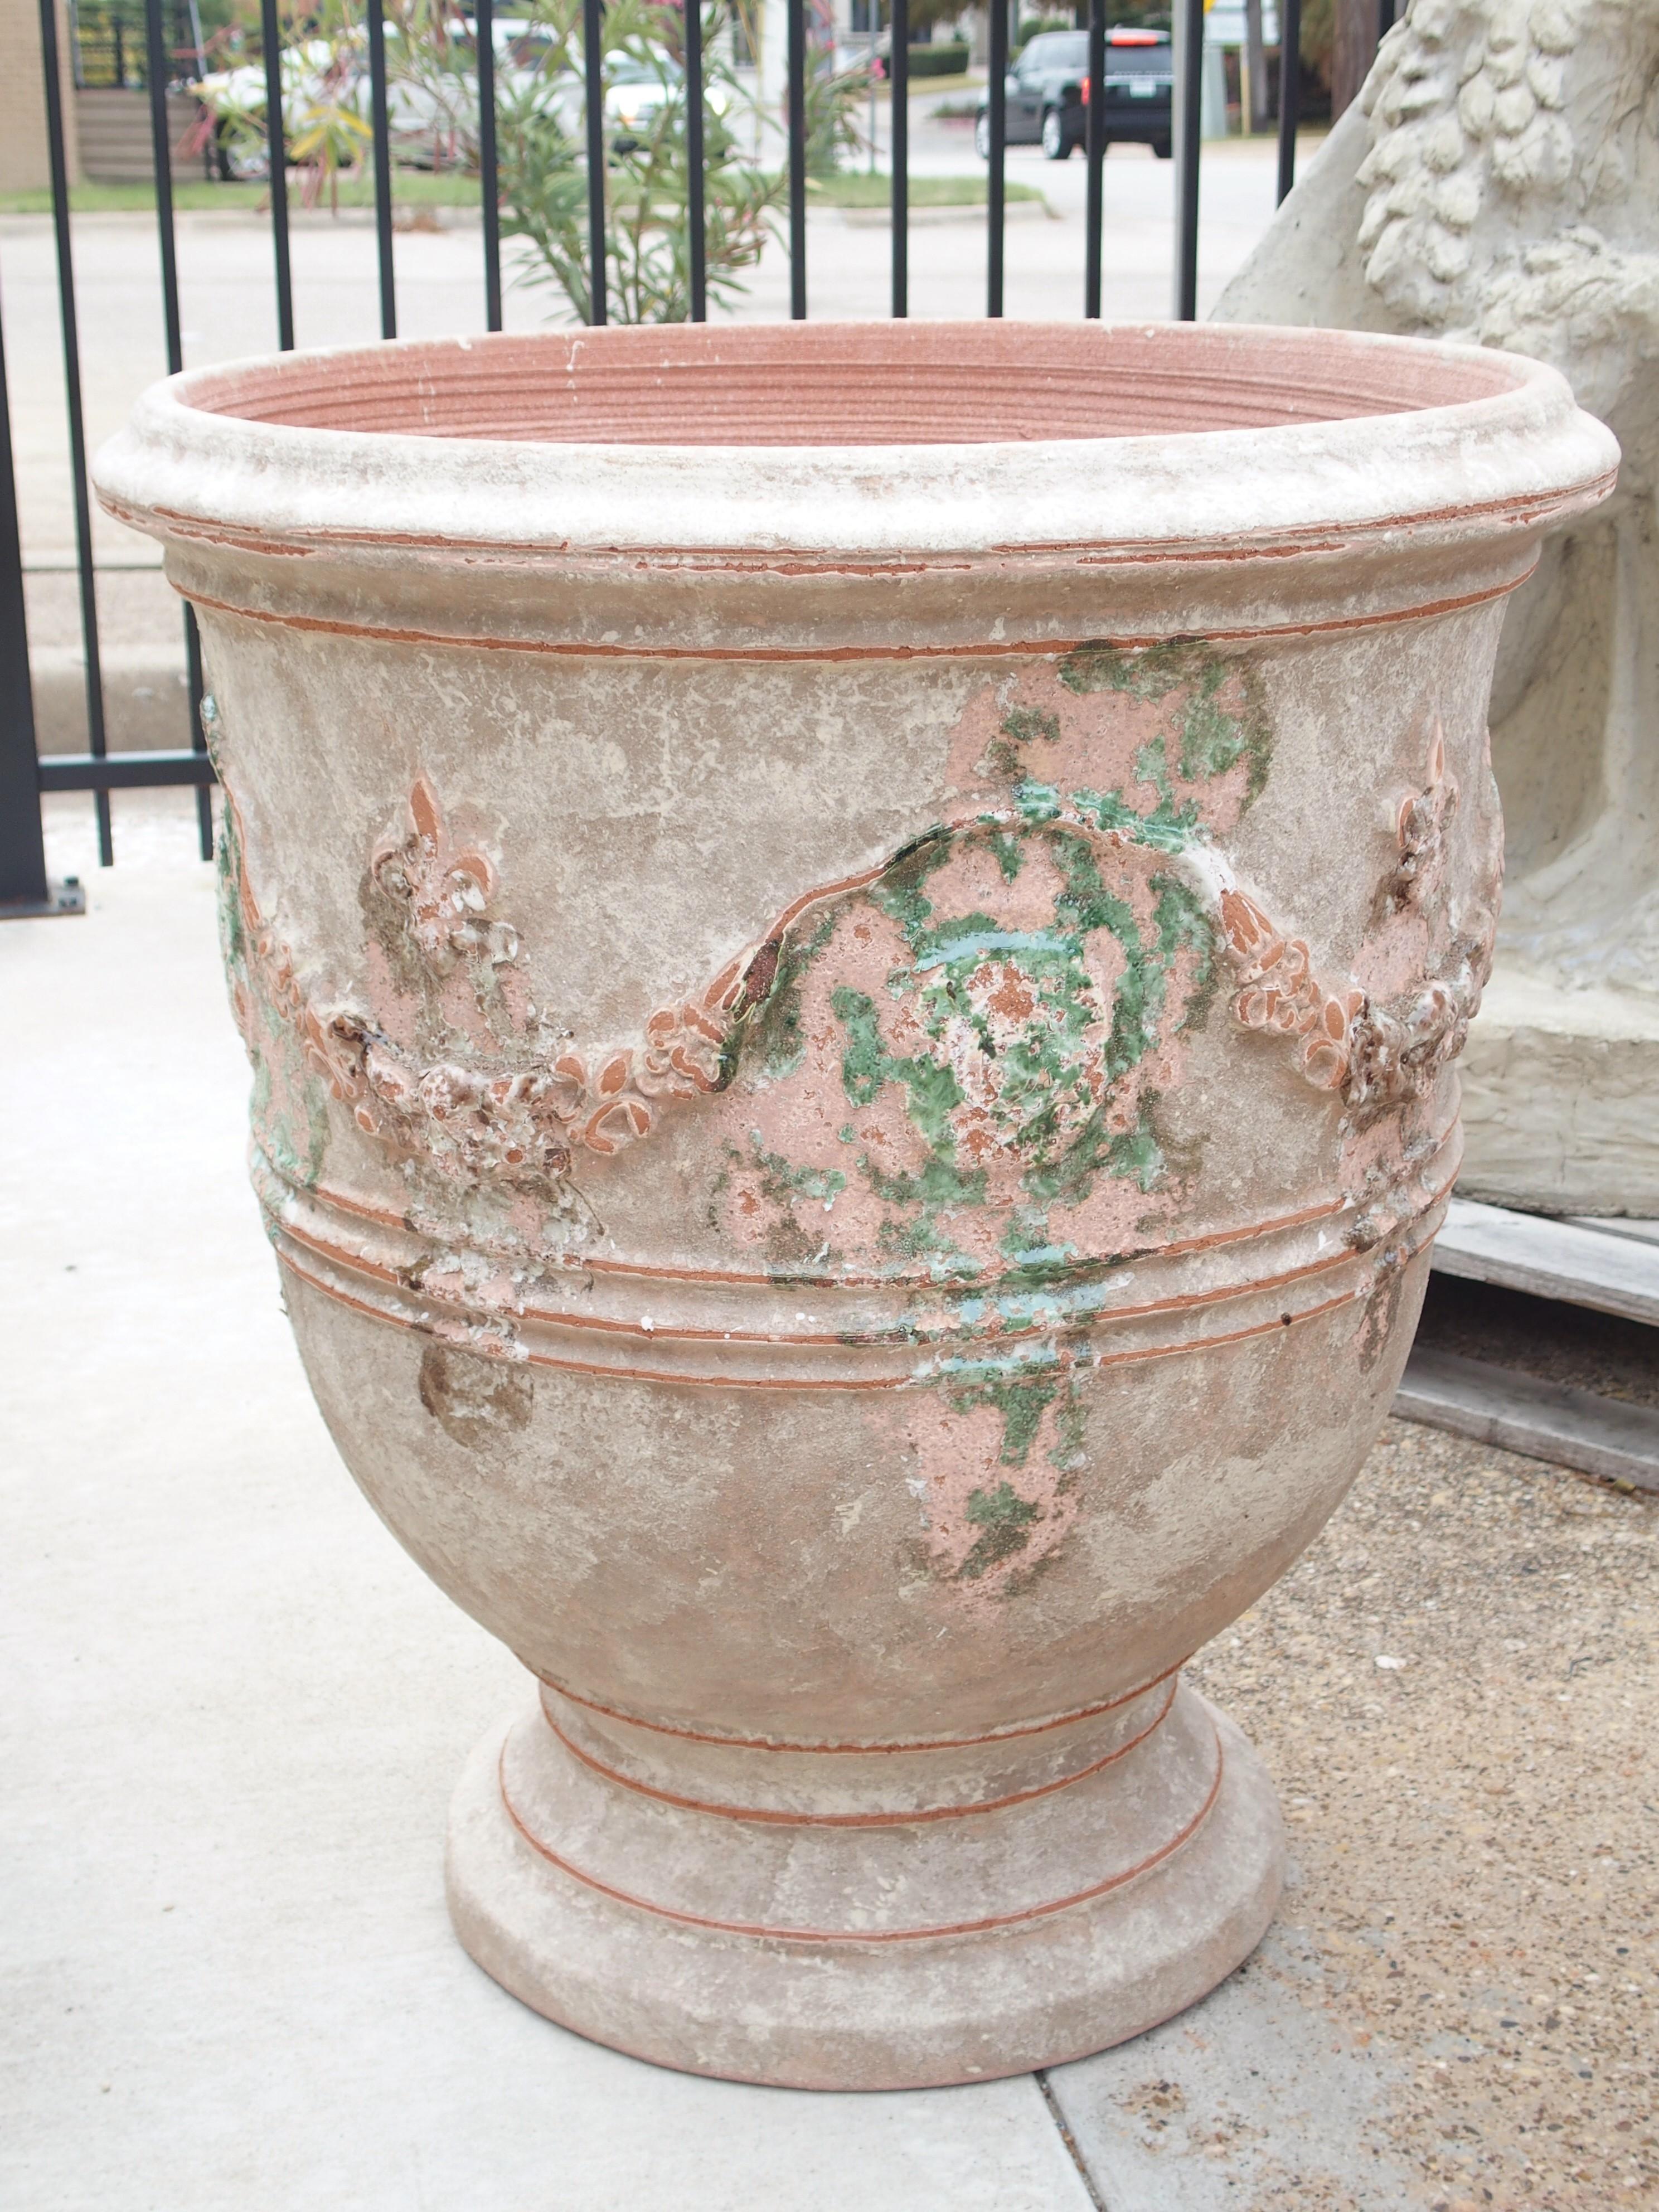 These large Anduze pots have been beautifully finished with a touch of matte white over terracotta and purposely distressed. They are adorned with garlands and fleur-de-lis, and have splashes of glazed-over green paint near the Anduze markings.